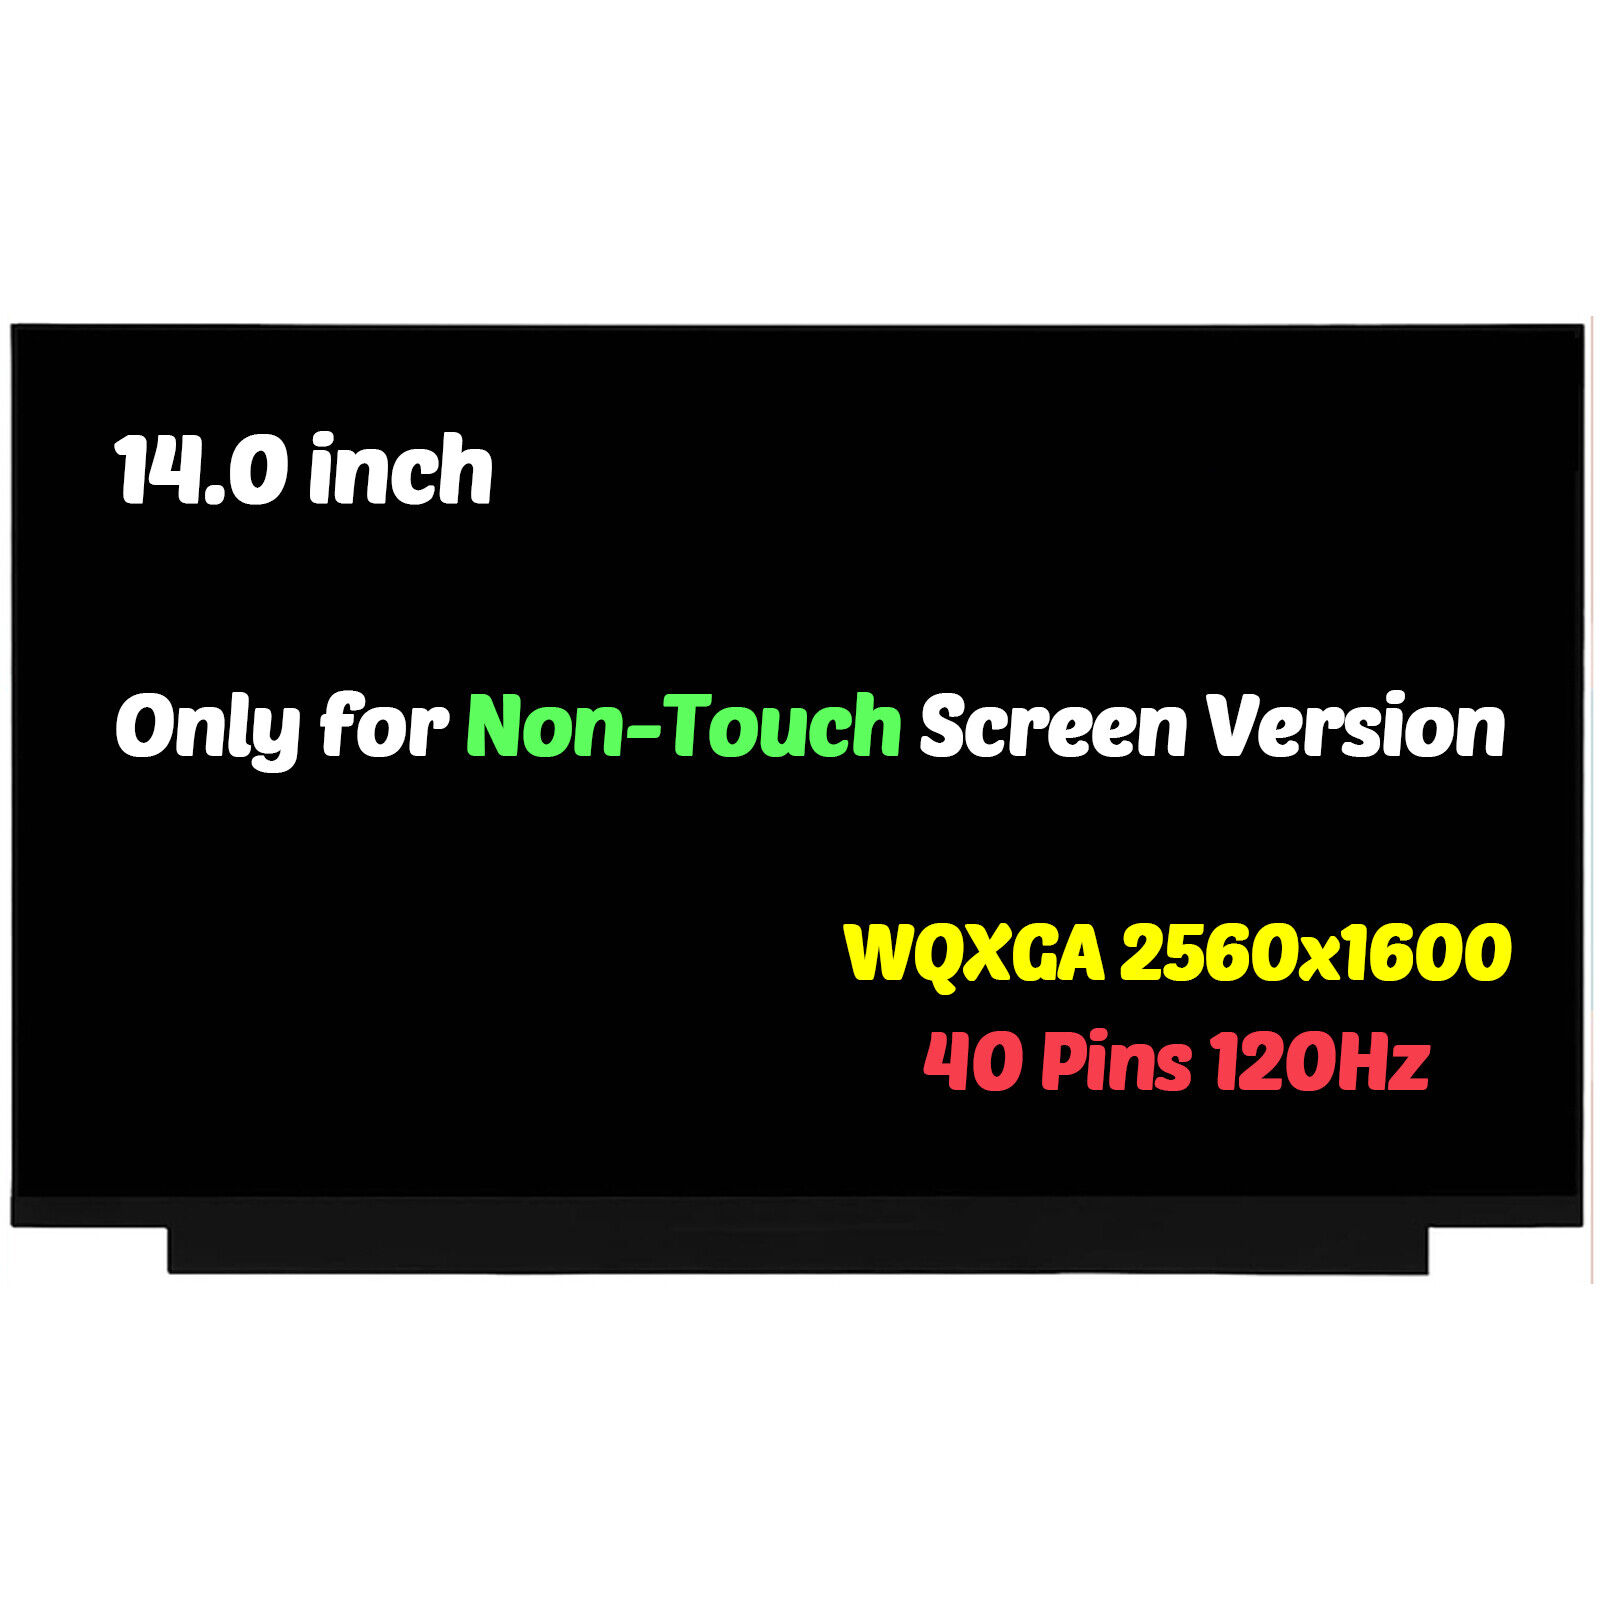 18010-14090100 LED LCD Screen Replacement 14.0